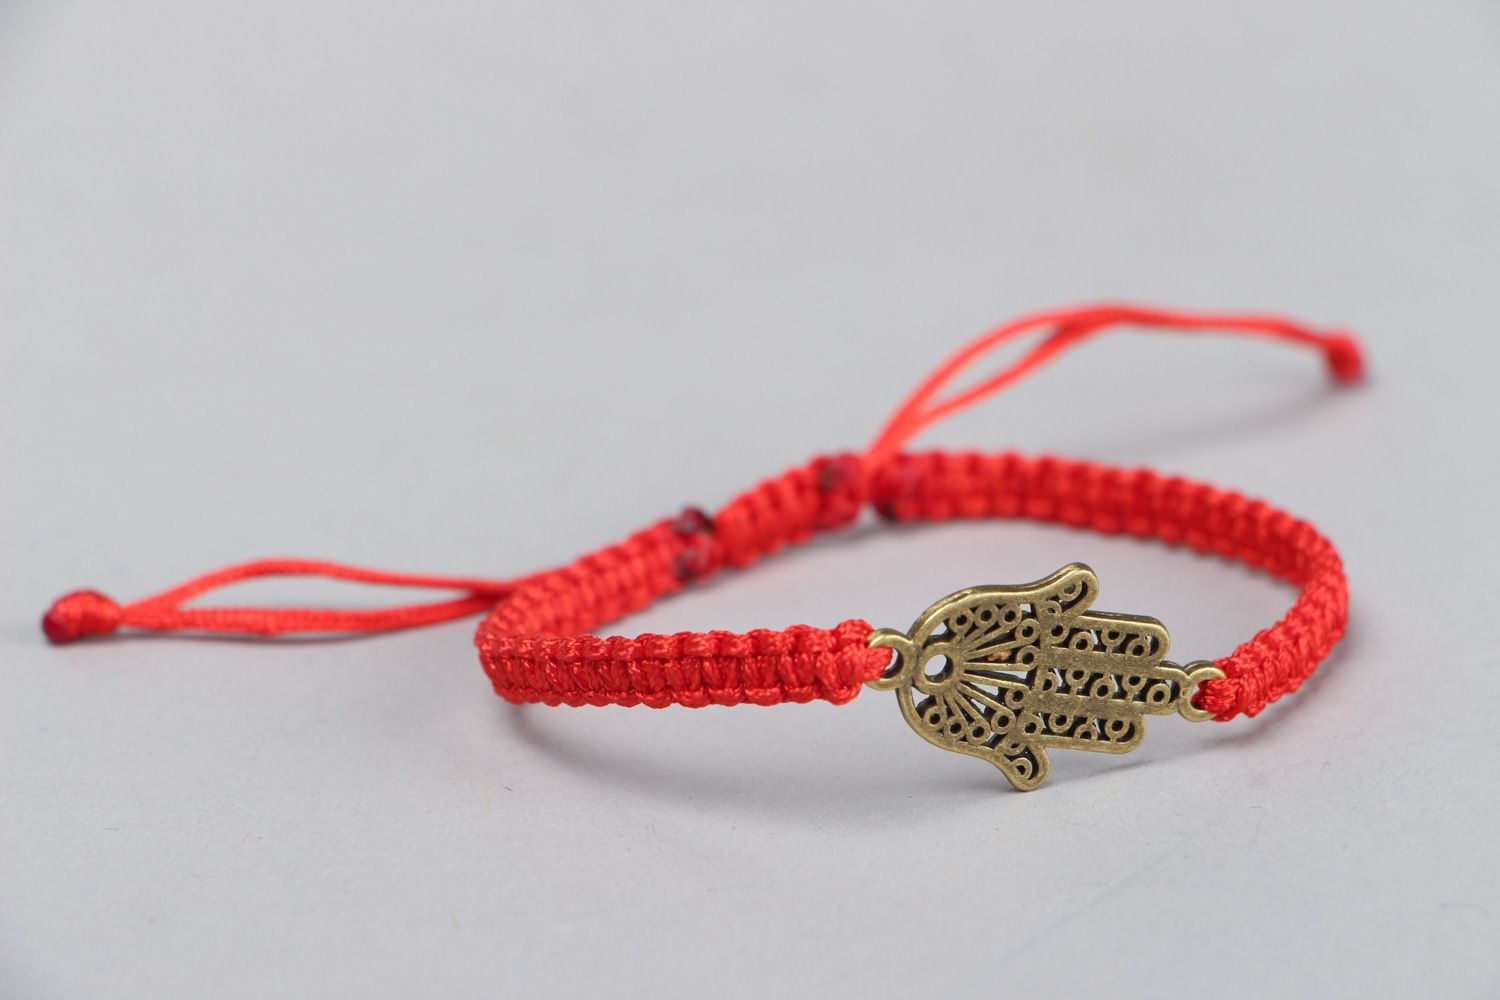 Thin handmade wrist friendship bracelet of red color with metal charm unisex photo 2